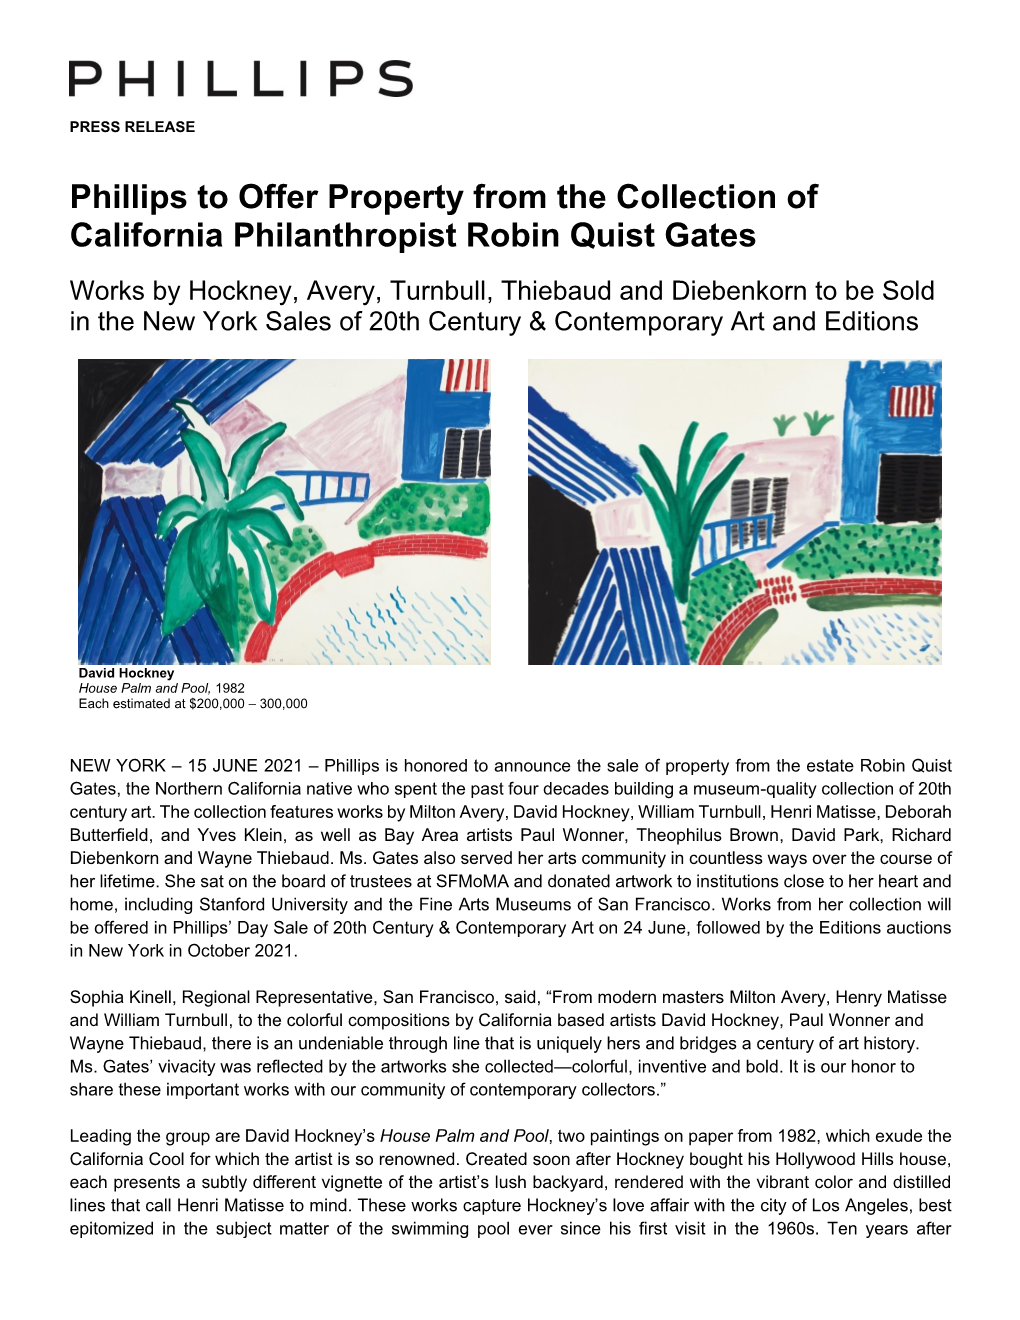 Phillips to Offer Property from the Collection of California Philanthropist Robin Quist Gates